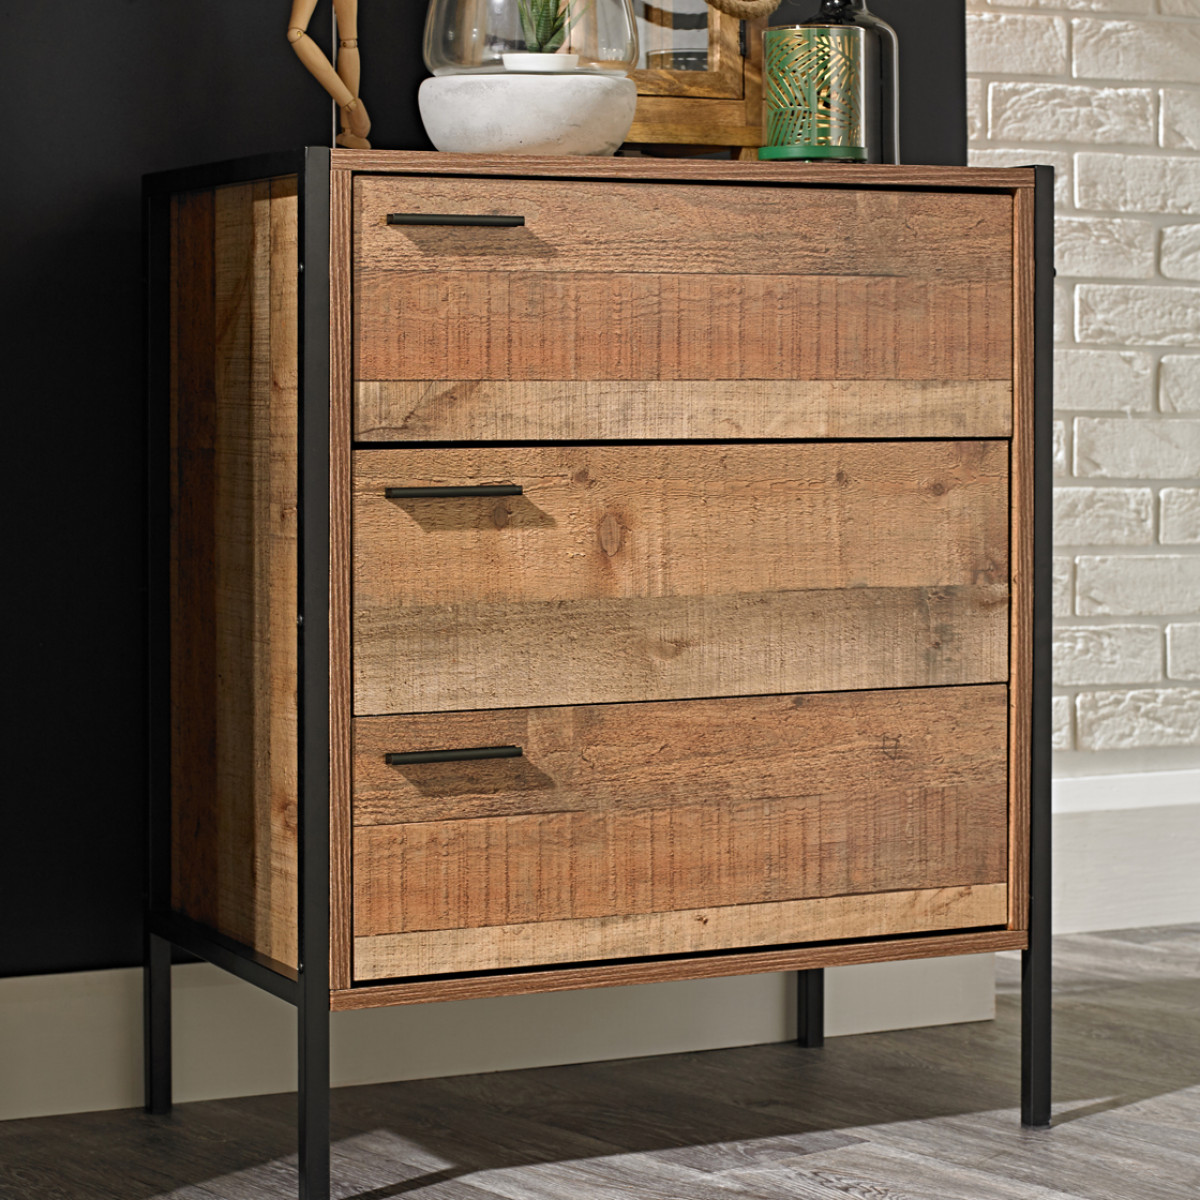 Hoxton 3 Drawer Chest Distressed Oak Effect Drawers Bedroom Storage